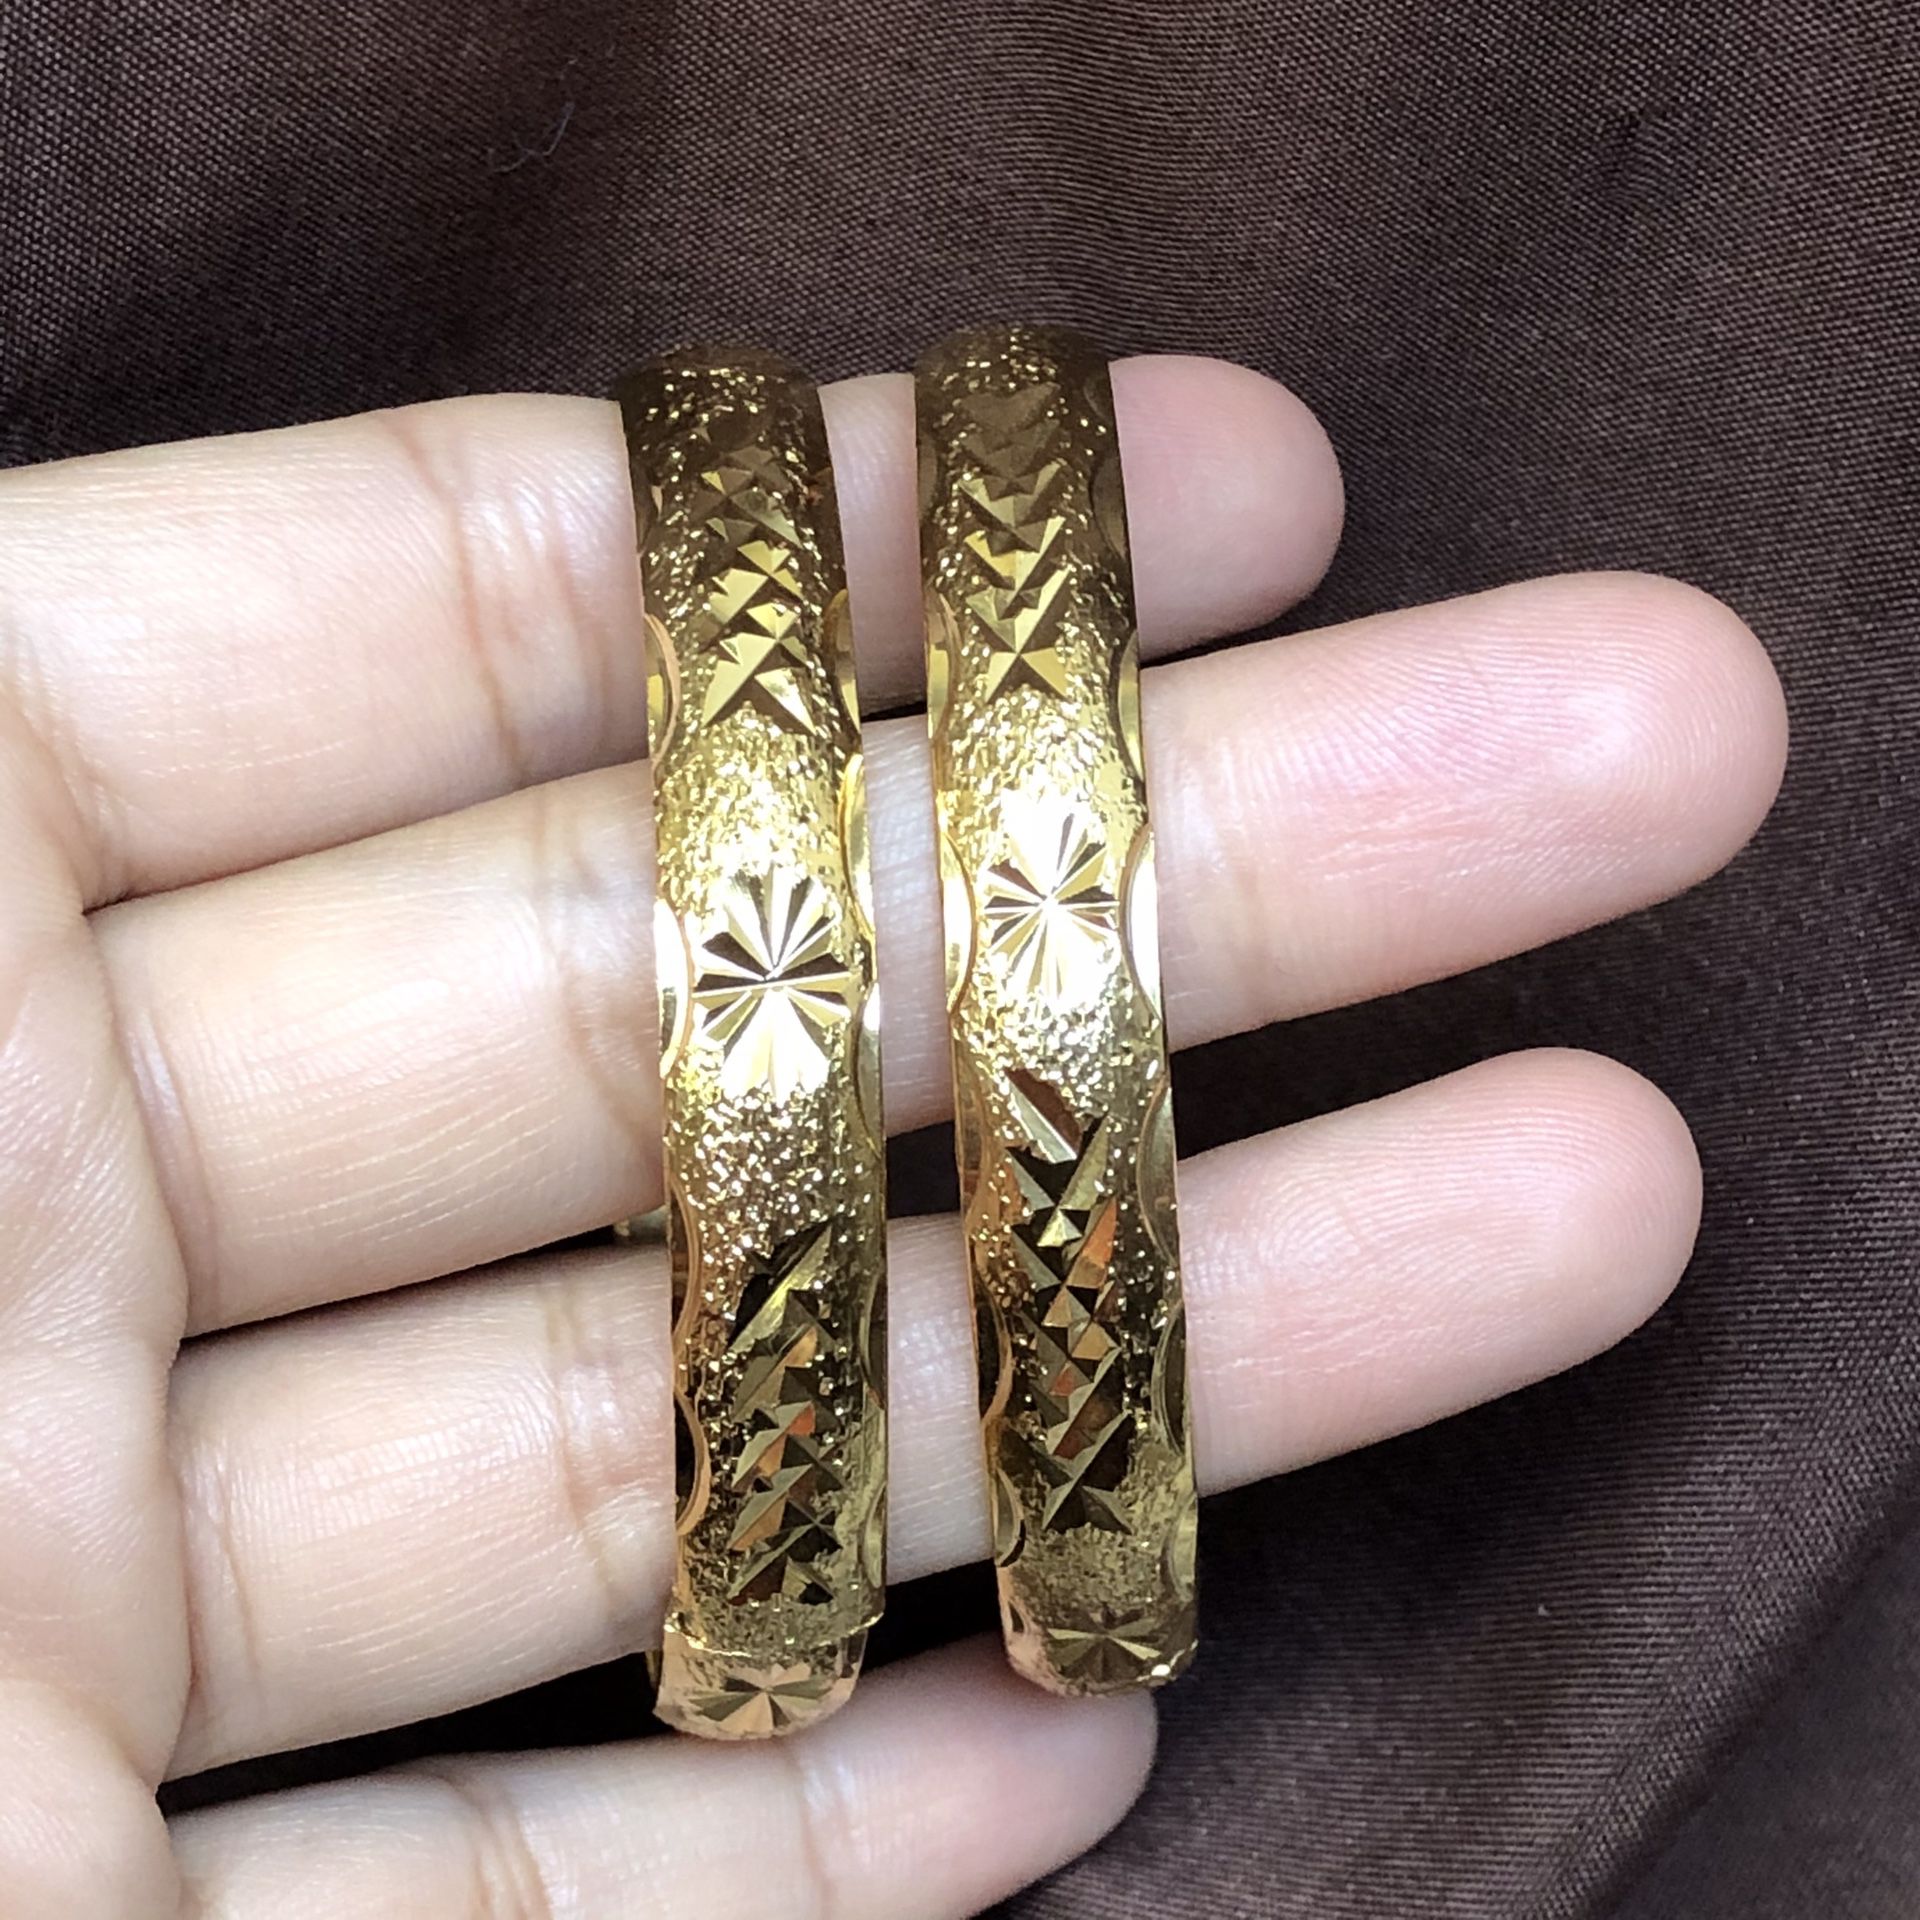 Gold Plated Bangles Heavy Highly Quality! 8” Around Openable Bracelets Women’s Jewelry Accessories 